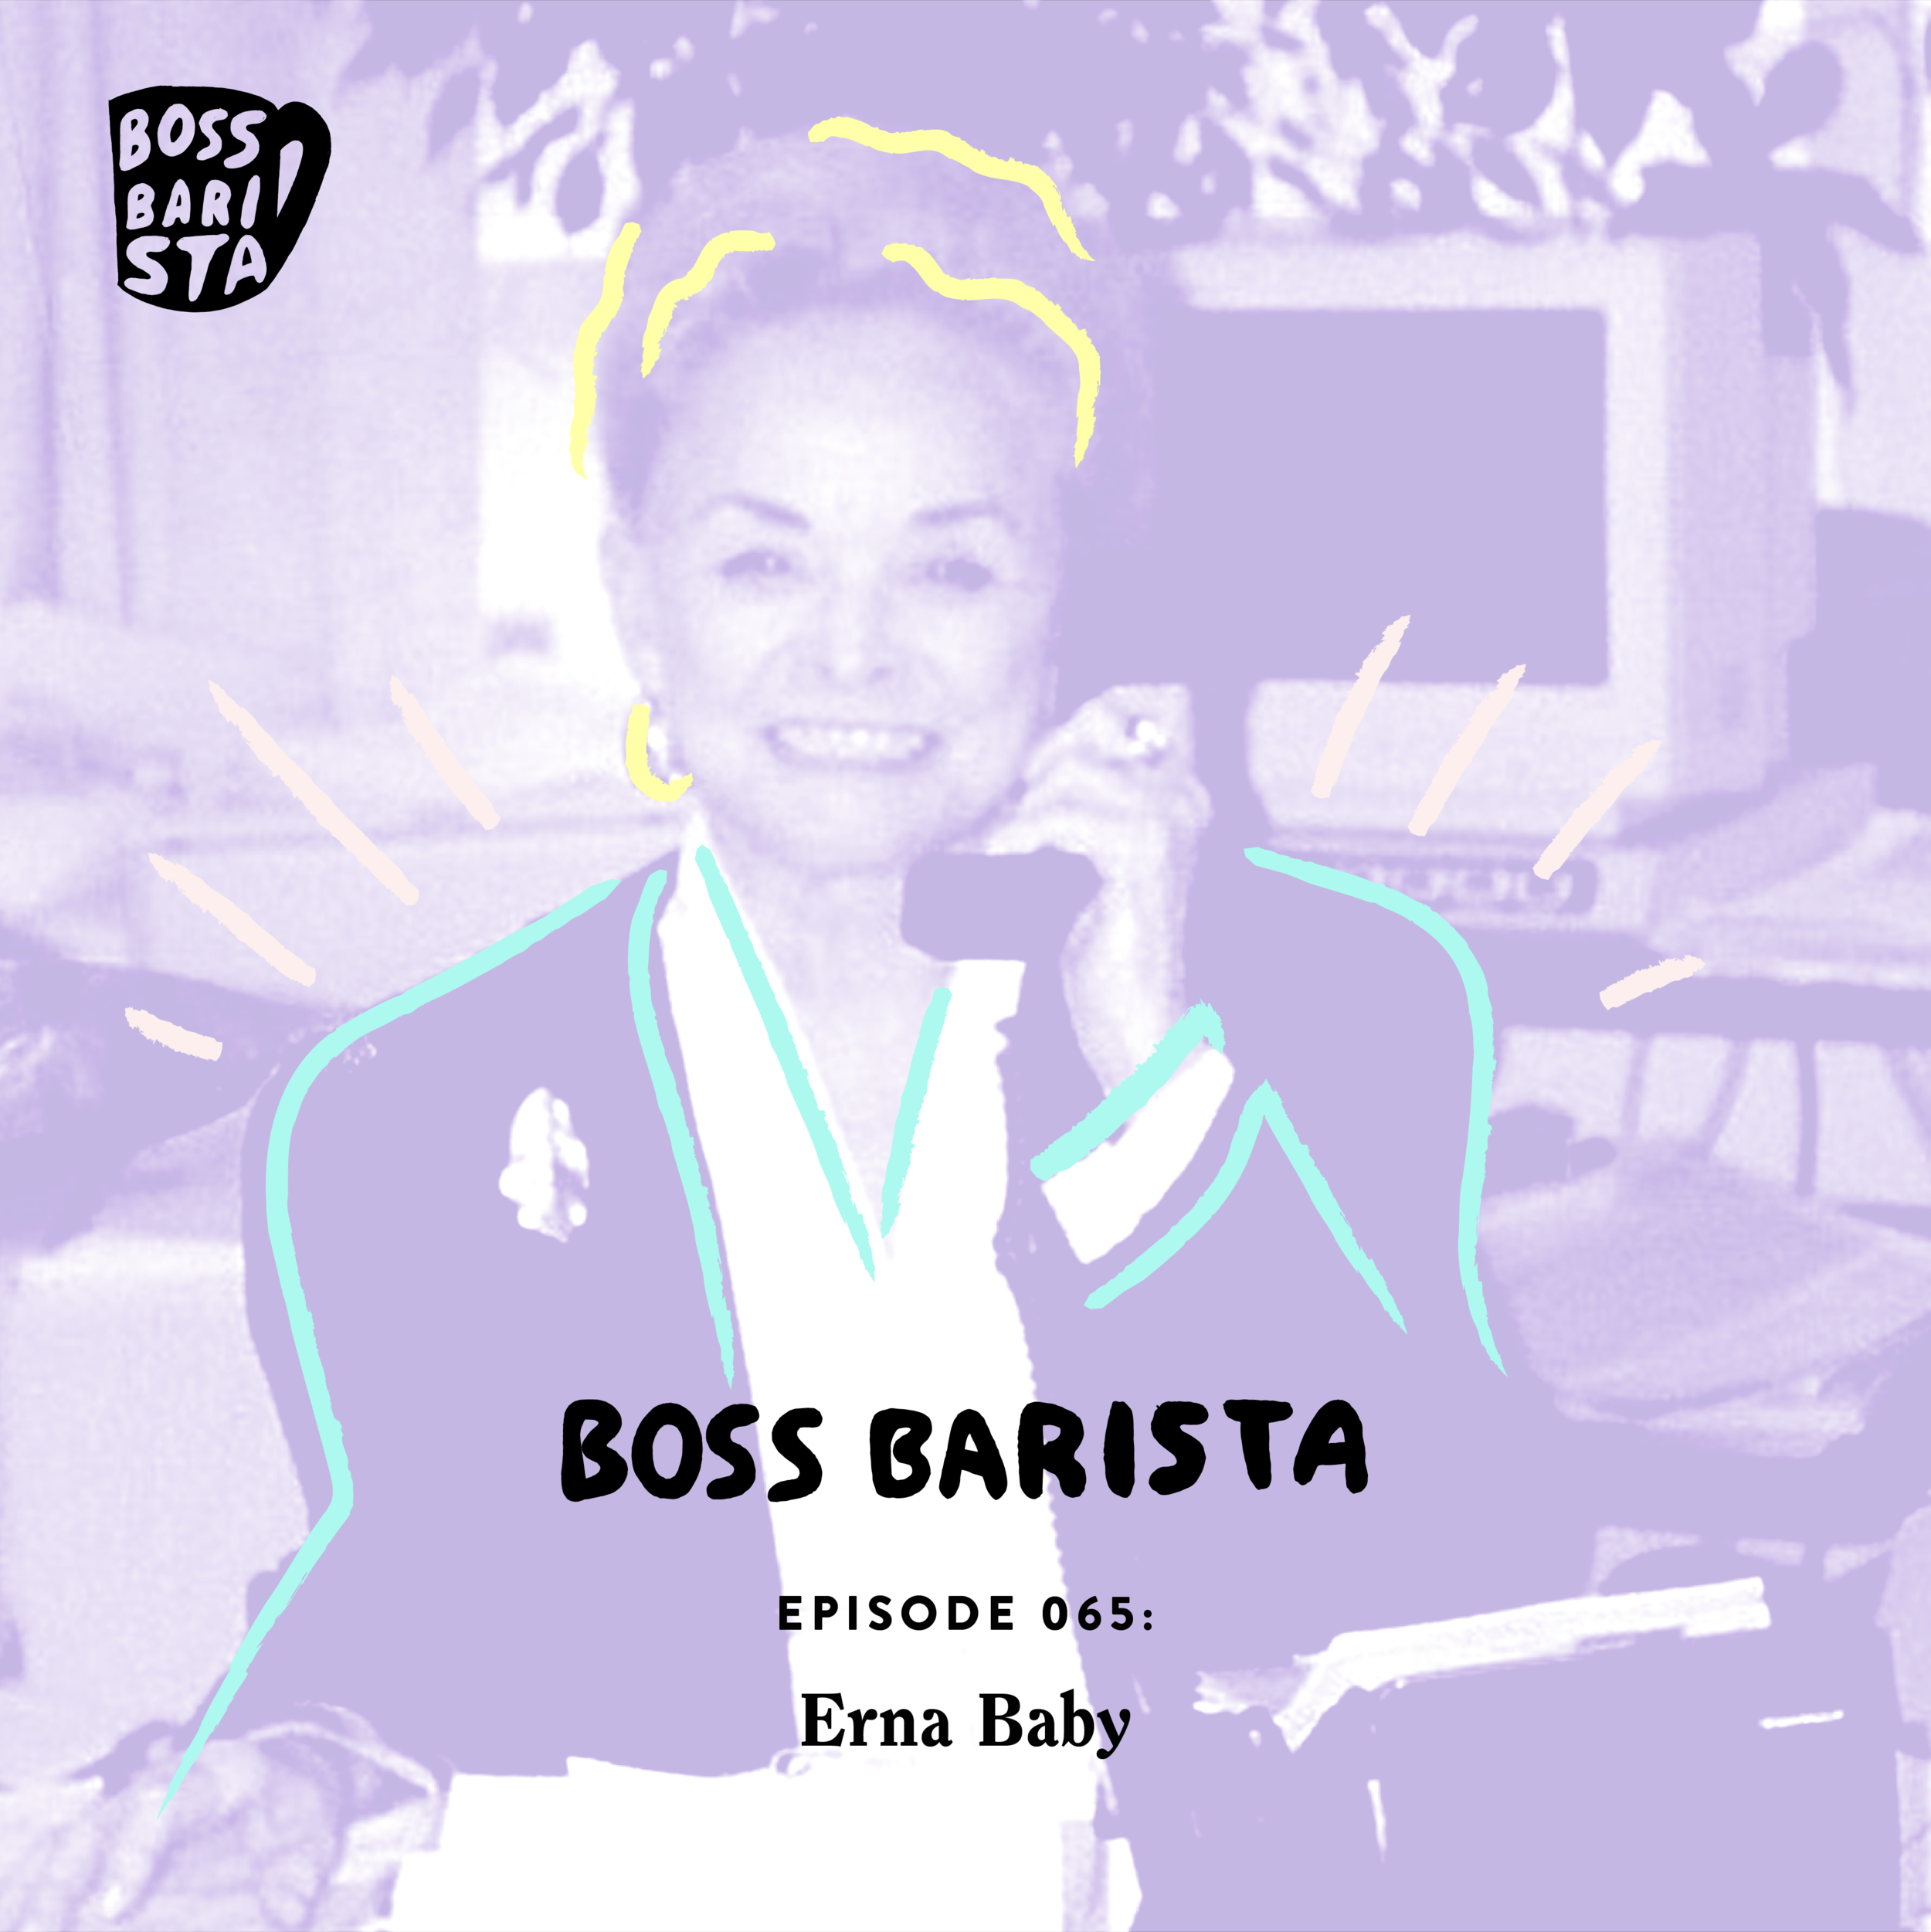 Boss_Barista_065_Cover_EPISODE_COVER.png